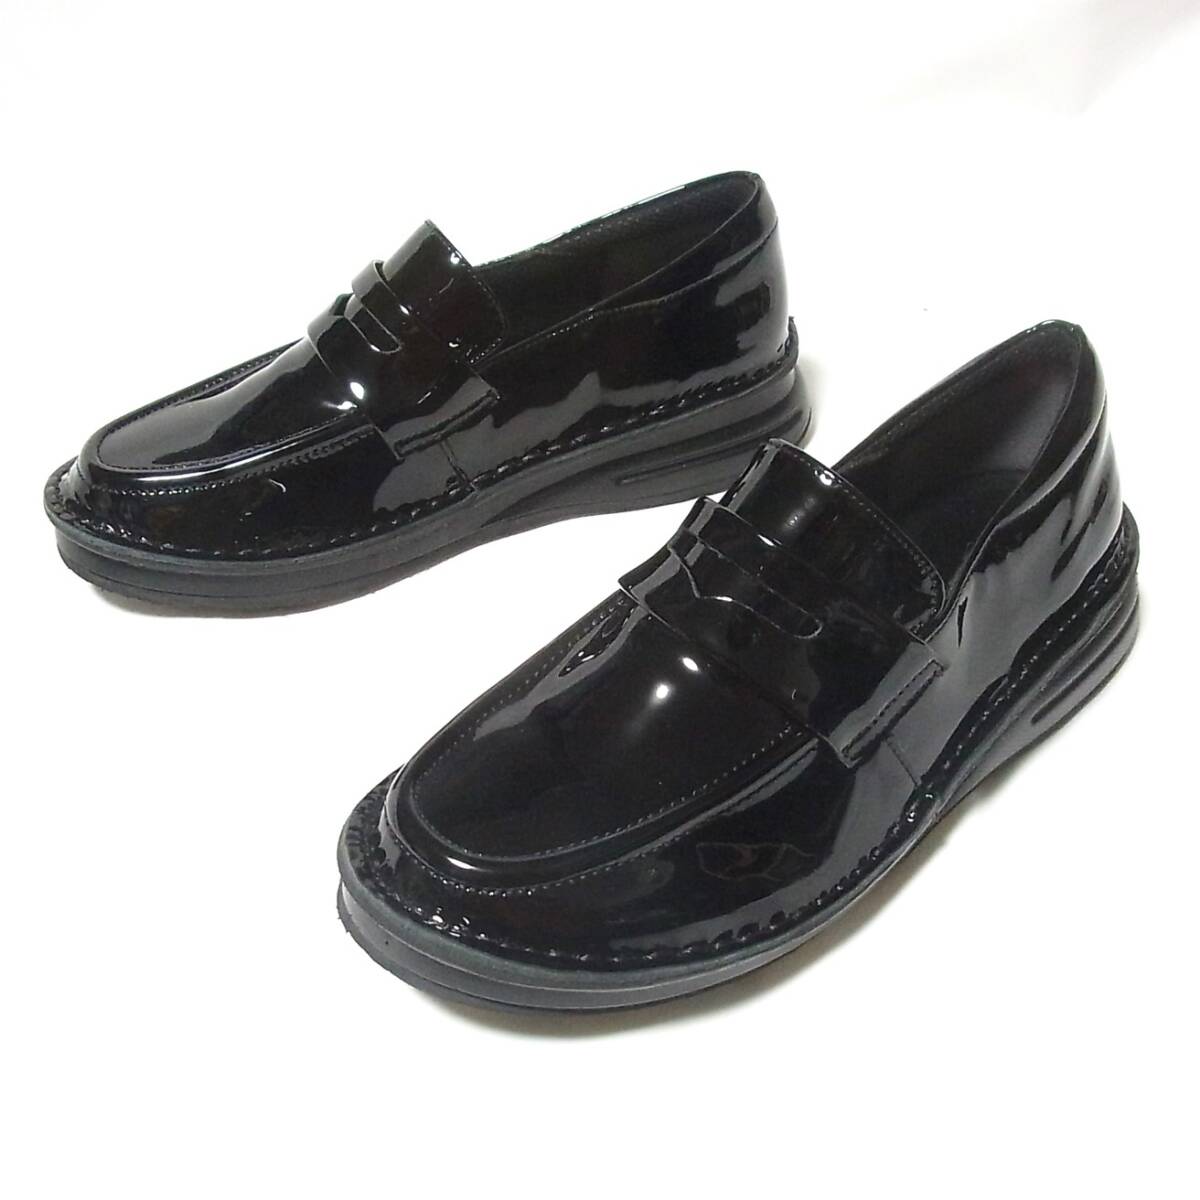  unused Dolce natural leather made in Japan Loafer type Town shoes 22.5cm/ wide width 3E regular price 19250 jpy present goods *Doruche black leather soft * sneakers 